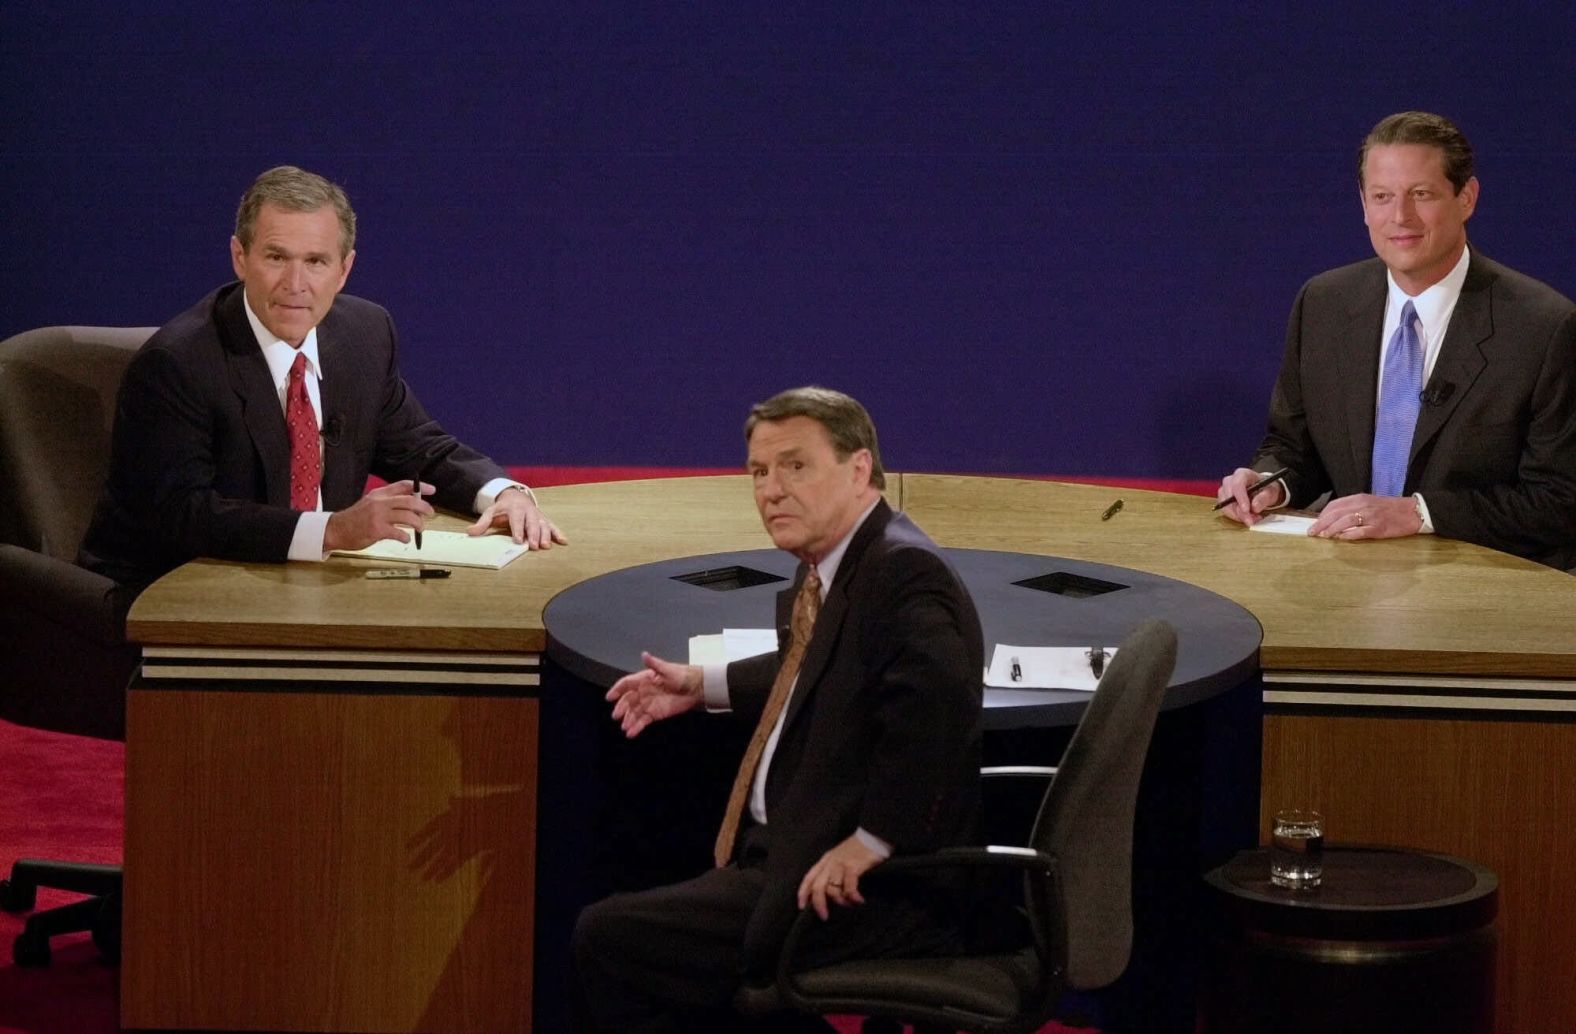 From left, Bush, moderator Jim Lehrer and Gore look up during a technical issue at the start of a debate in 2000.